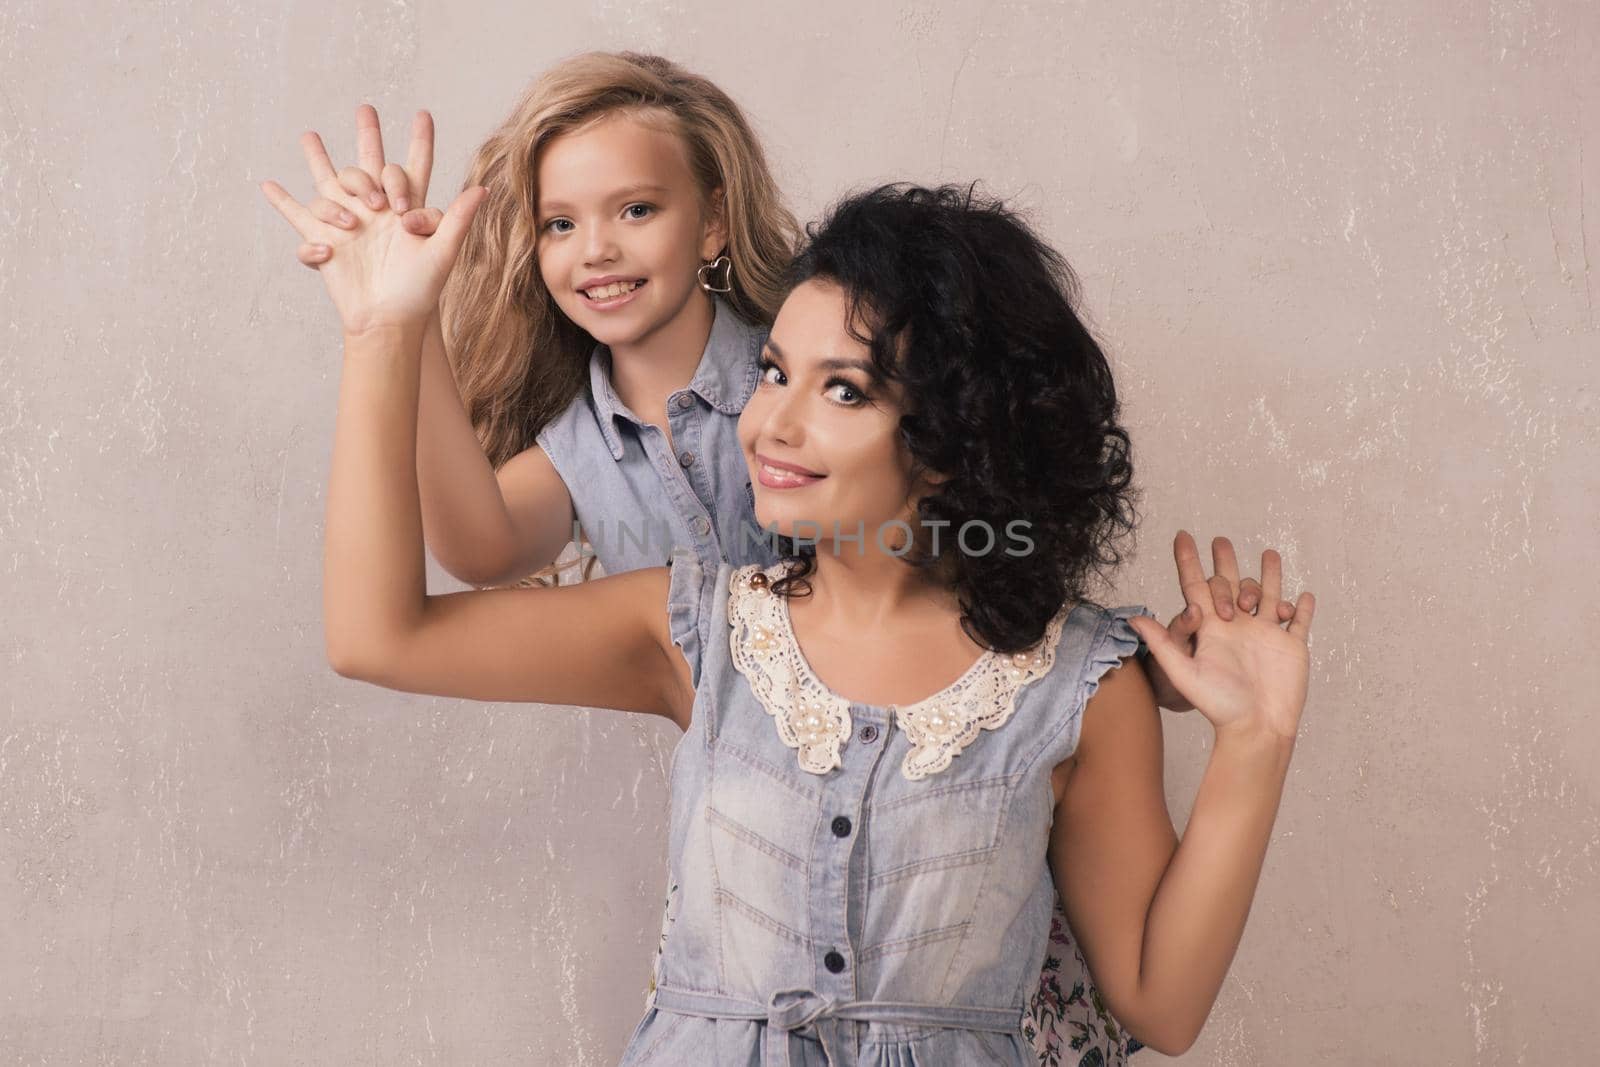 The little girl and the mother dressed in denim dress has fun near a grey wall.